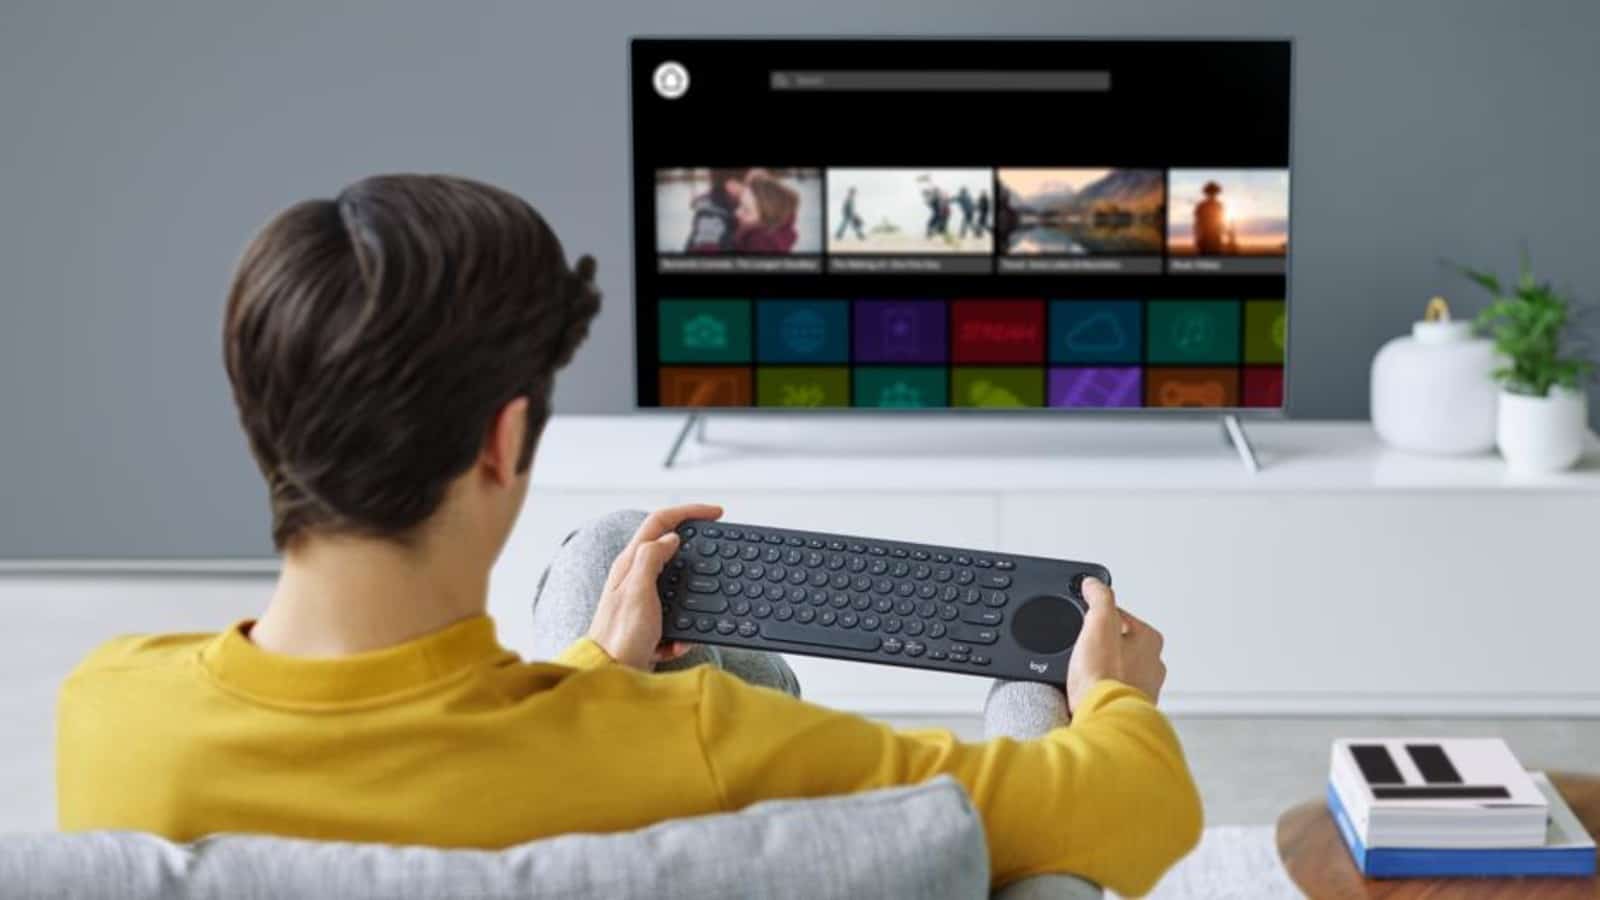 What Keyboard Works With Samsung Smart TV